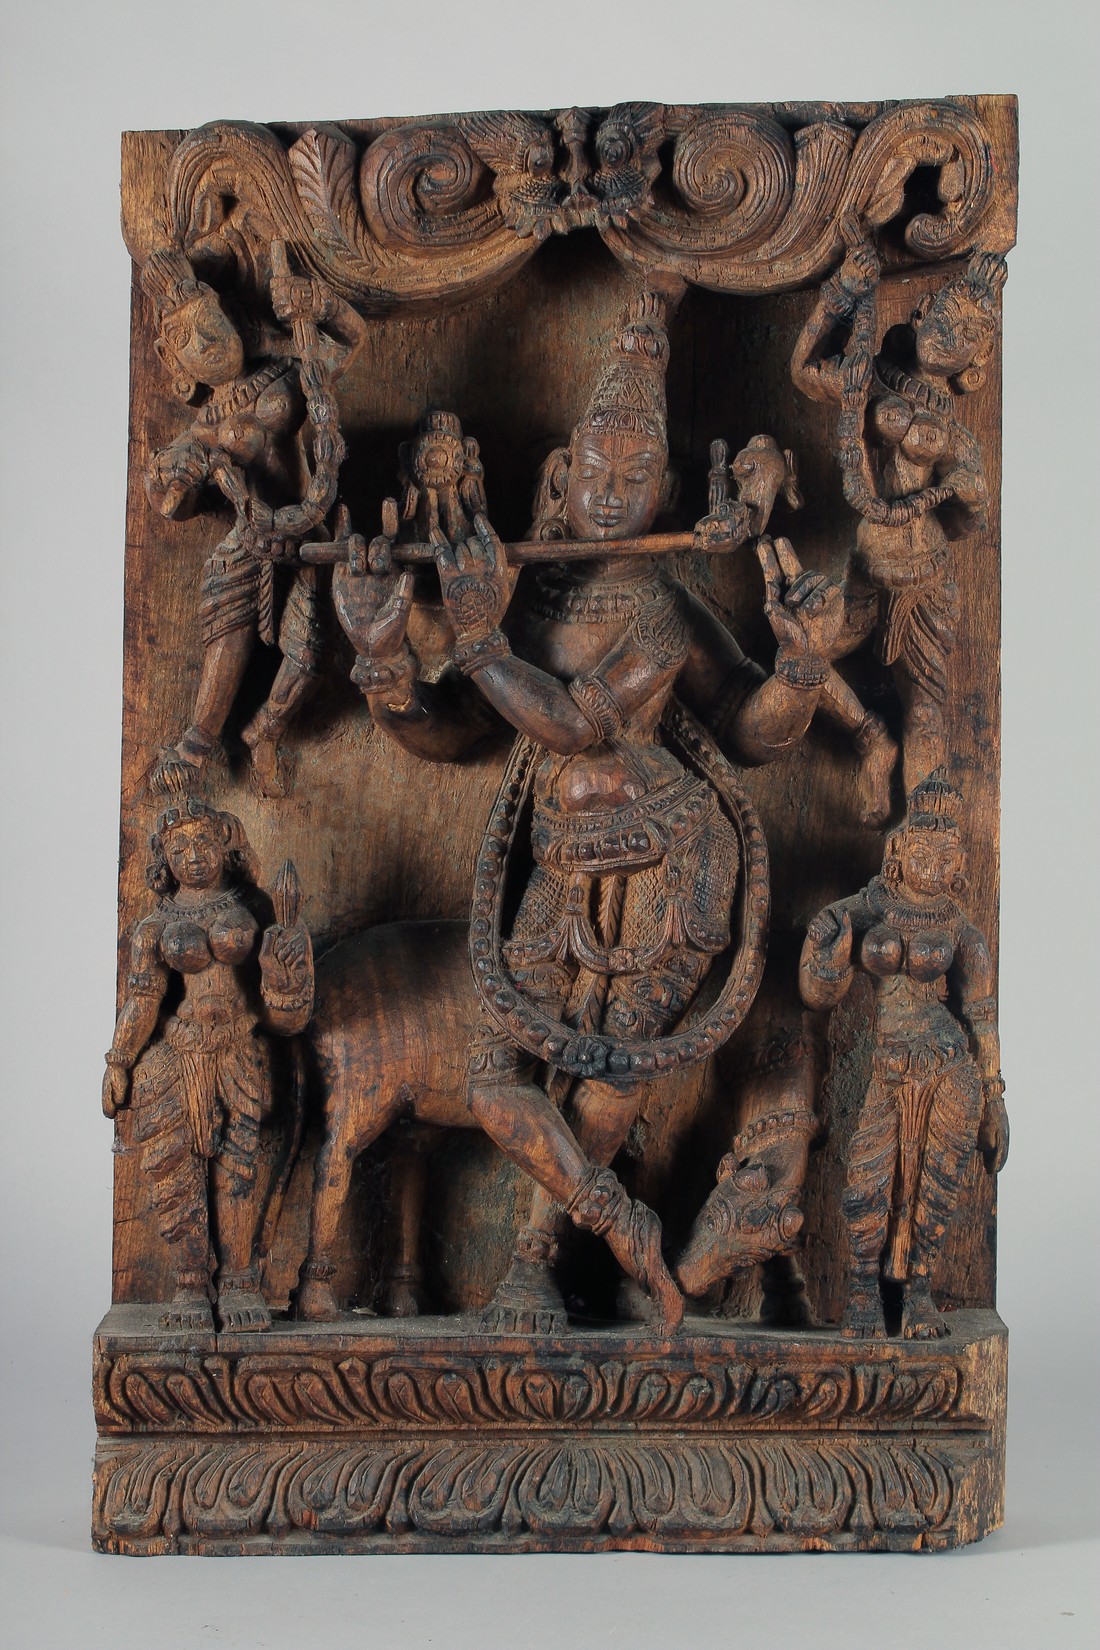 A LARGE INDIAN CARVED WOODEN PANEL, with central deity playing a musical instrument surrounded by